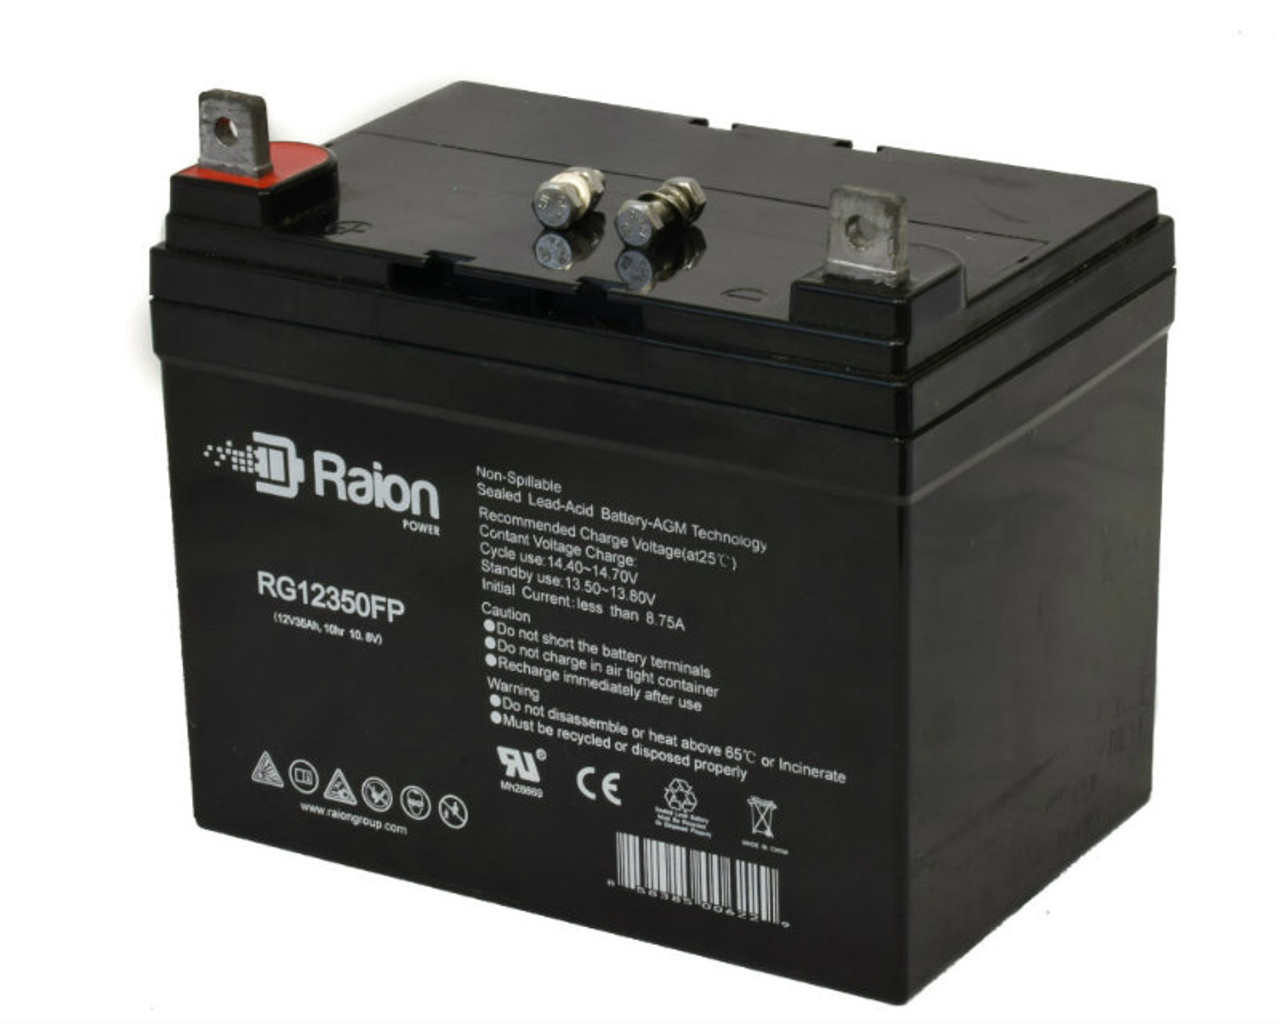 Raion Power Replacement 12V 35Ah Battery for Ingersoll Equipment 4118 - 1 Pack